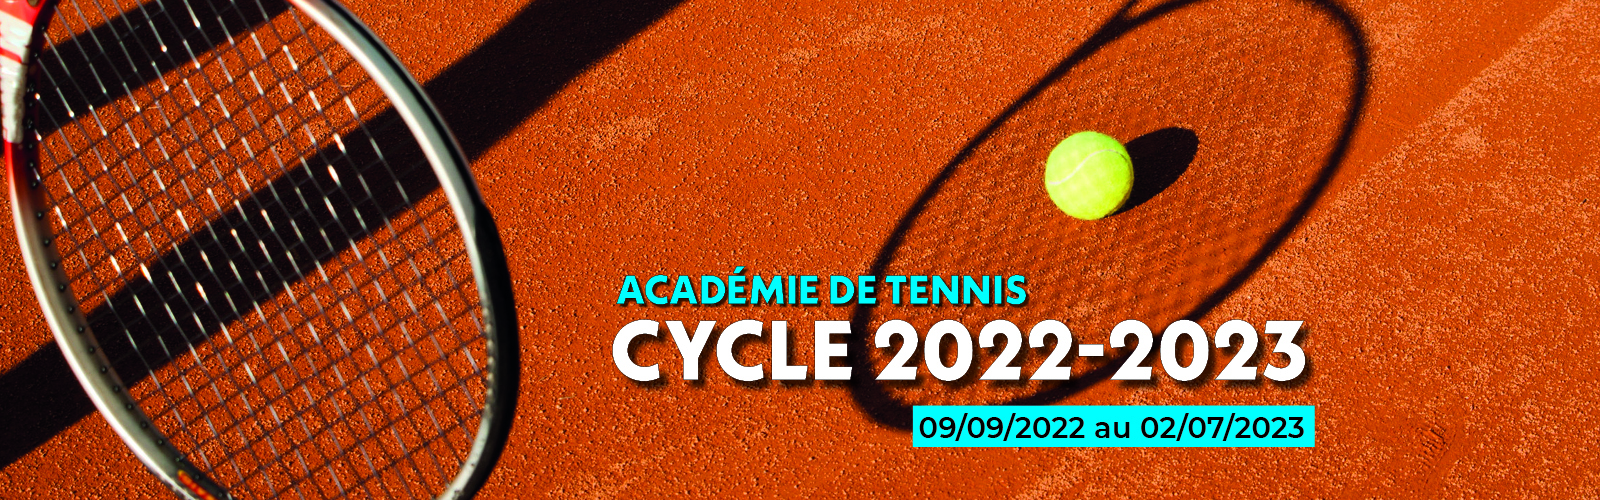 Tennis Cycle 2022-2023